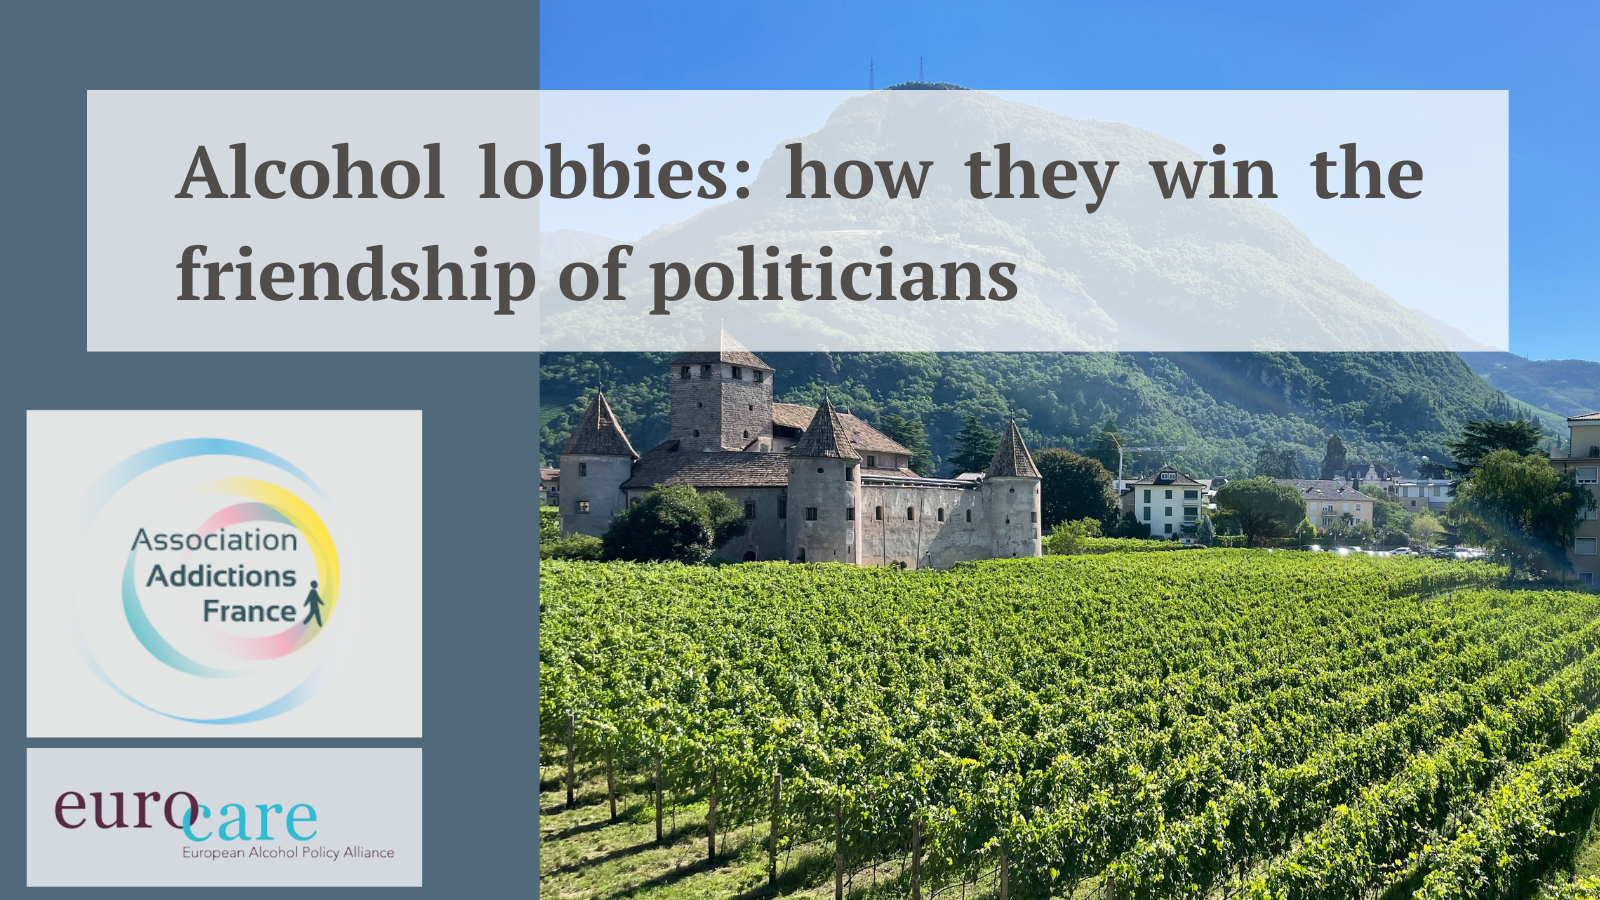 Alcohol lobbies: how they win the friendship of politicians (2)